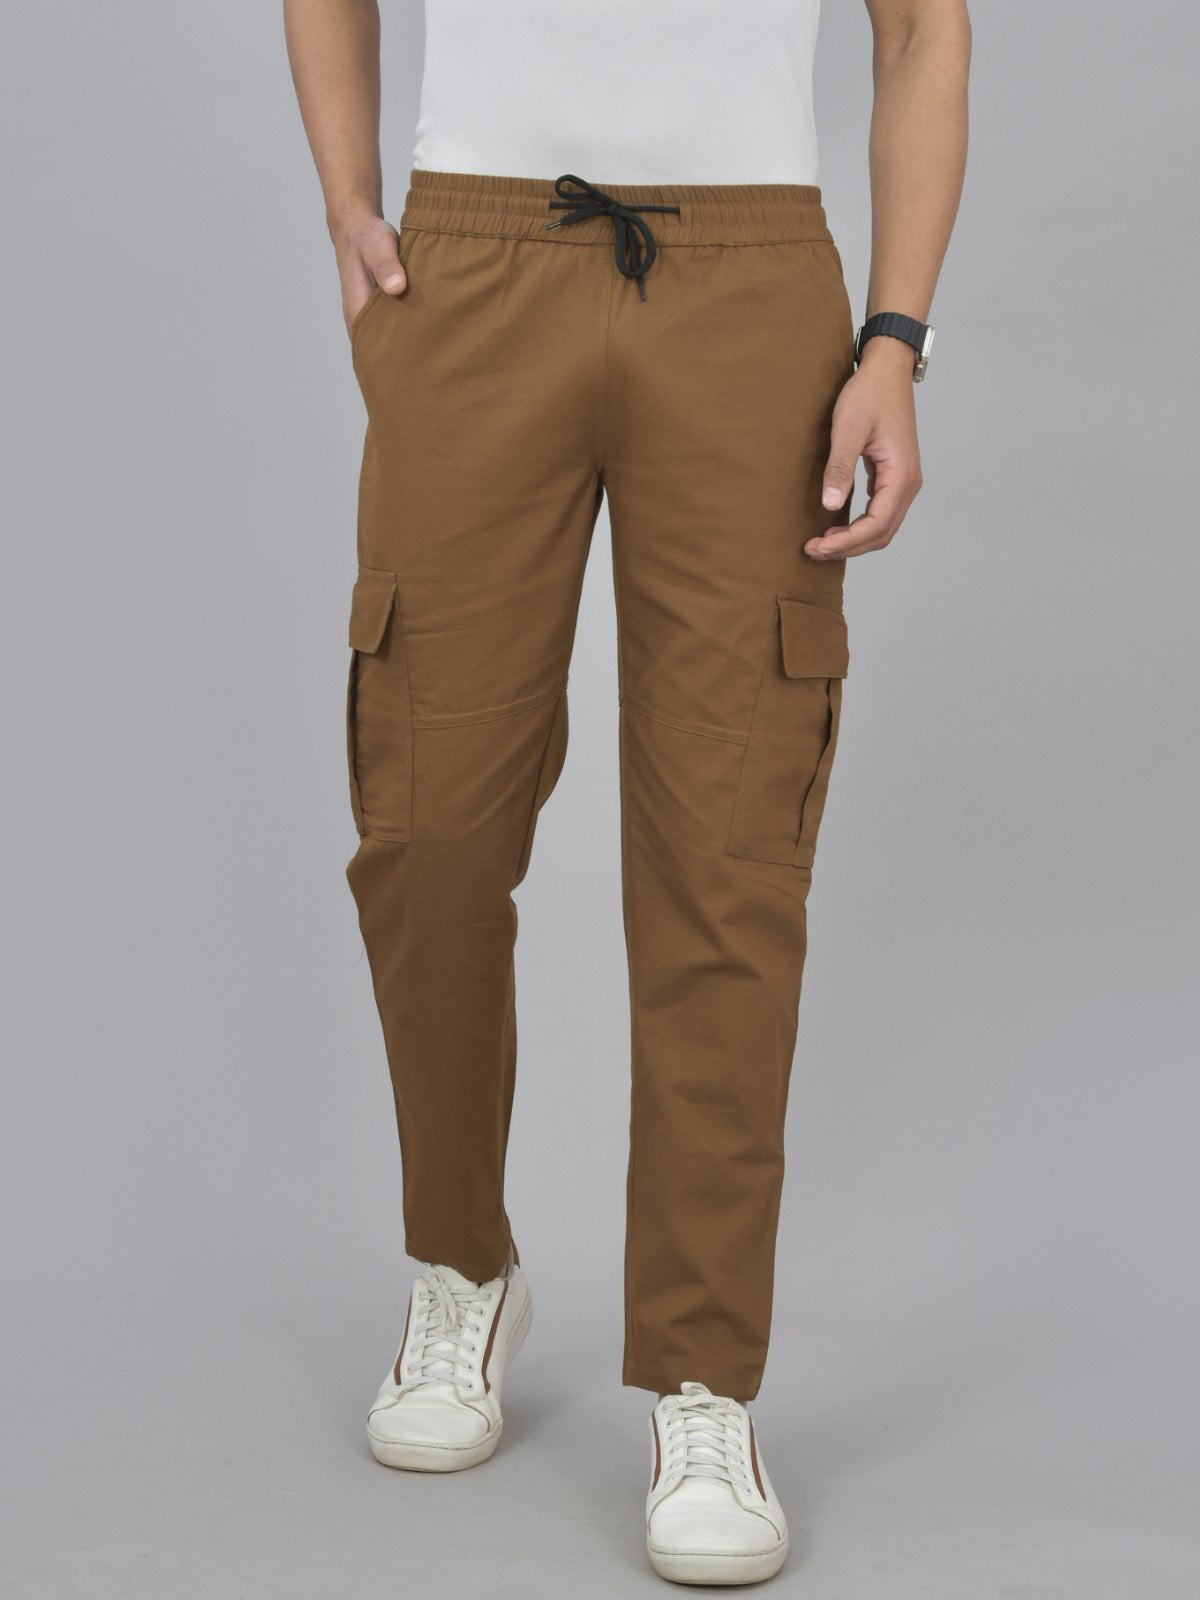 Pack Of 2 Mens Brown And Navy Blue Twill Straight Cargo Pants Combo